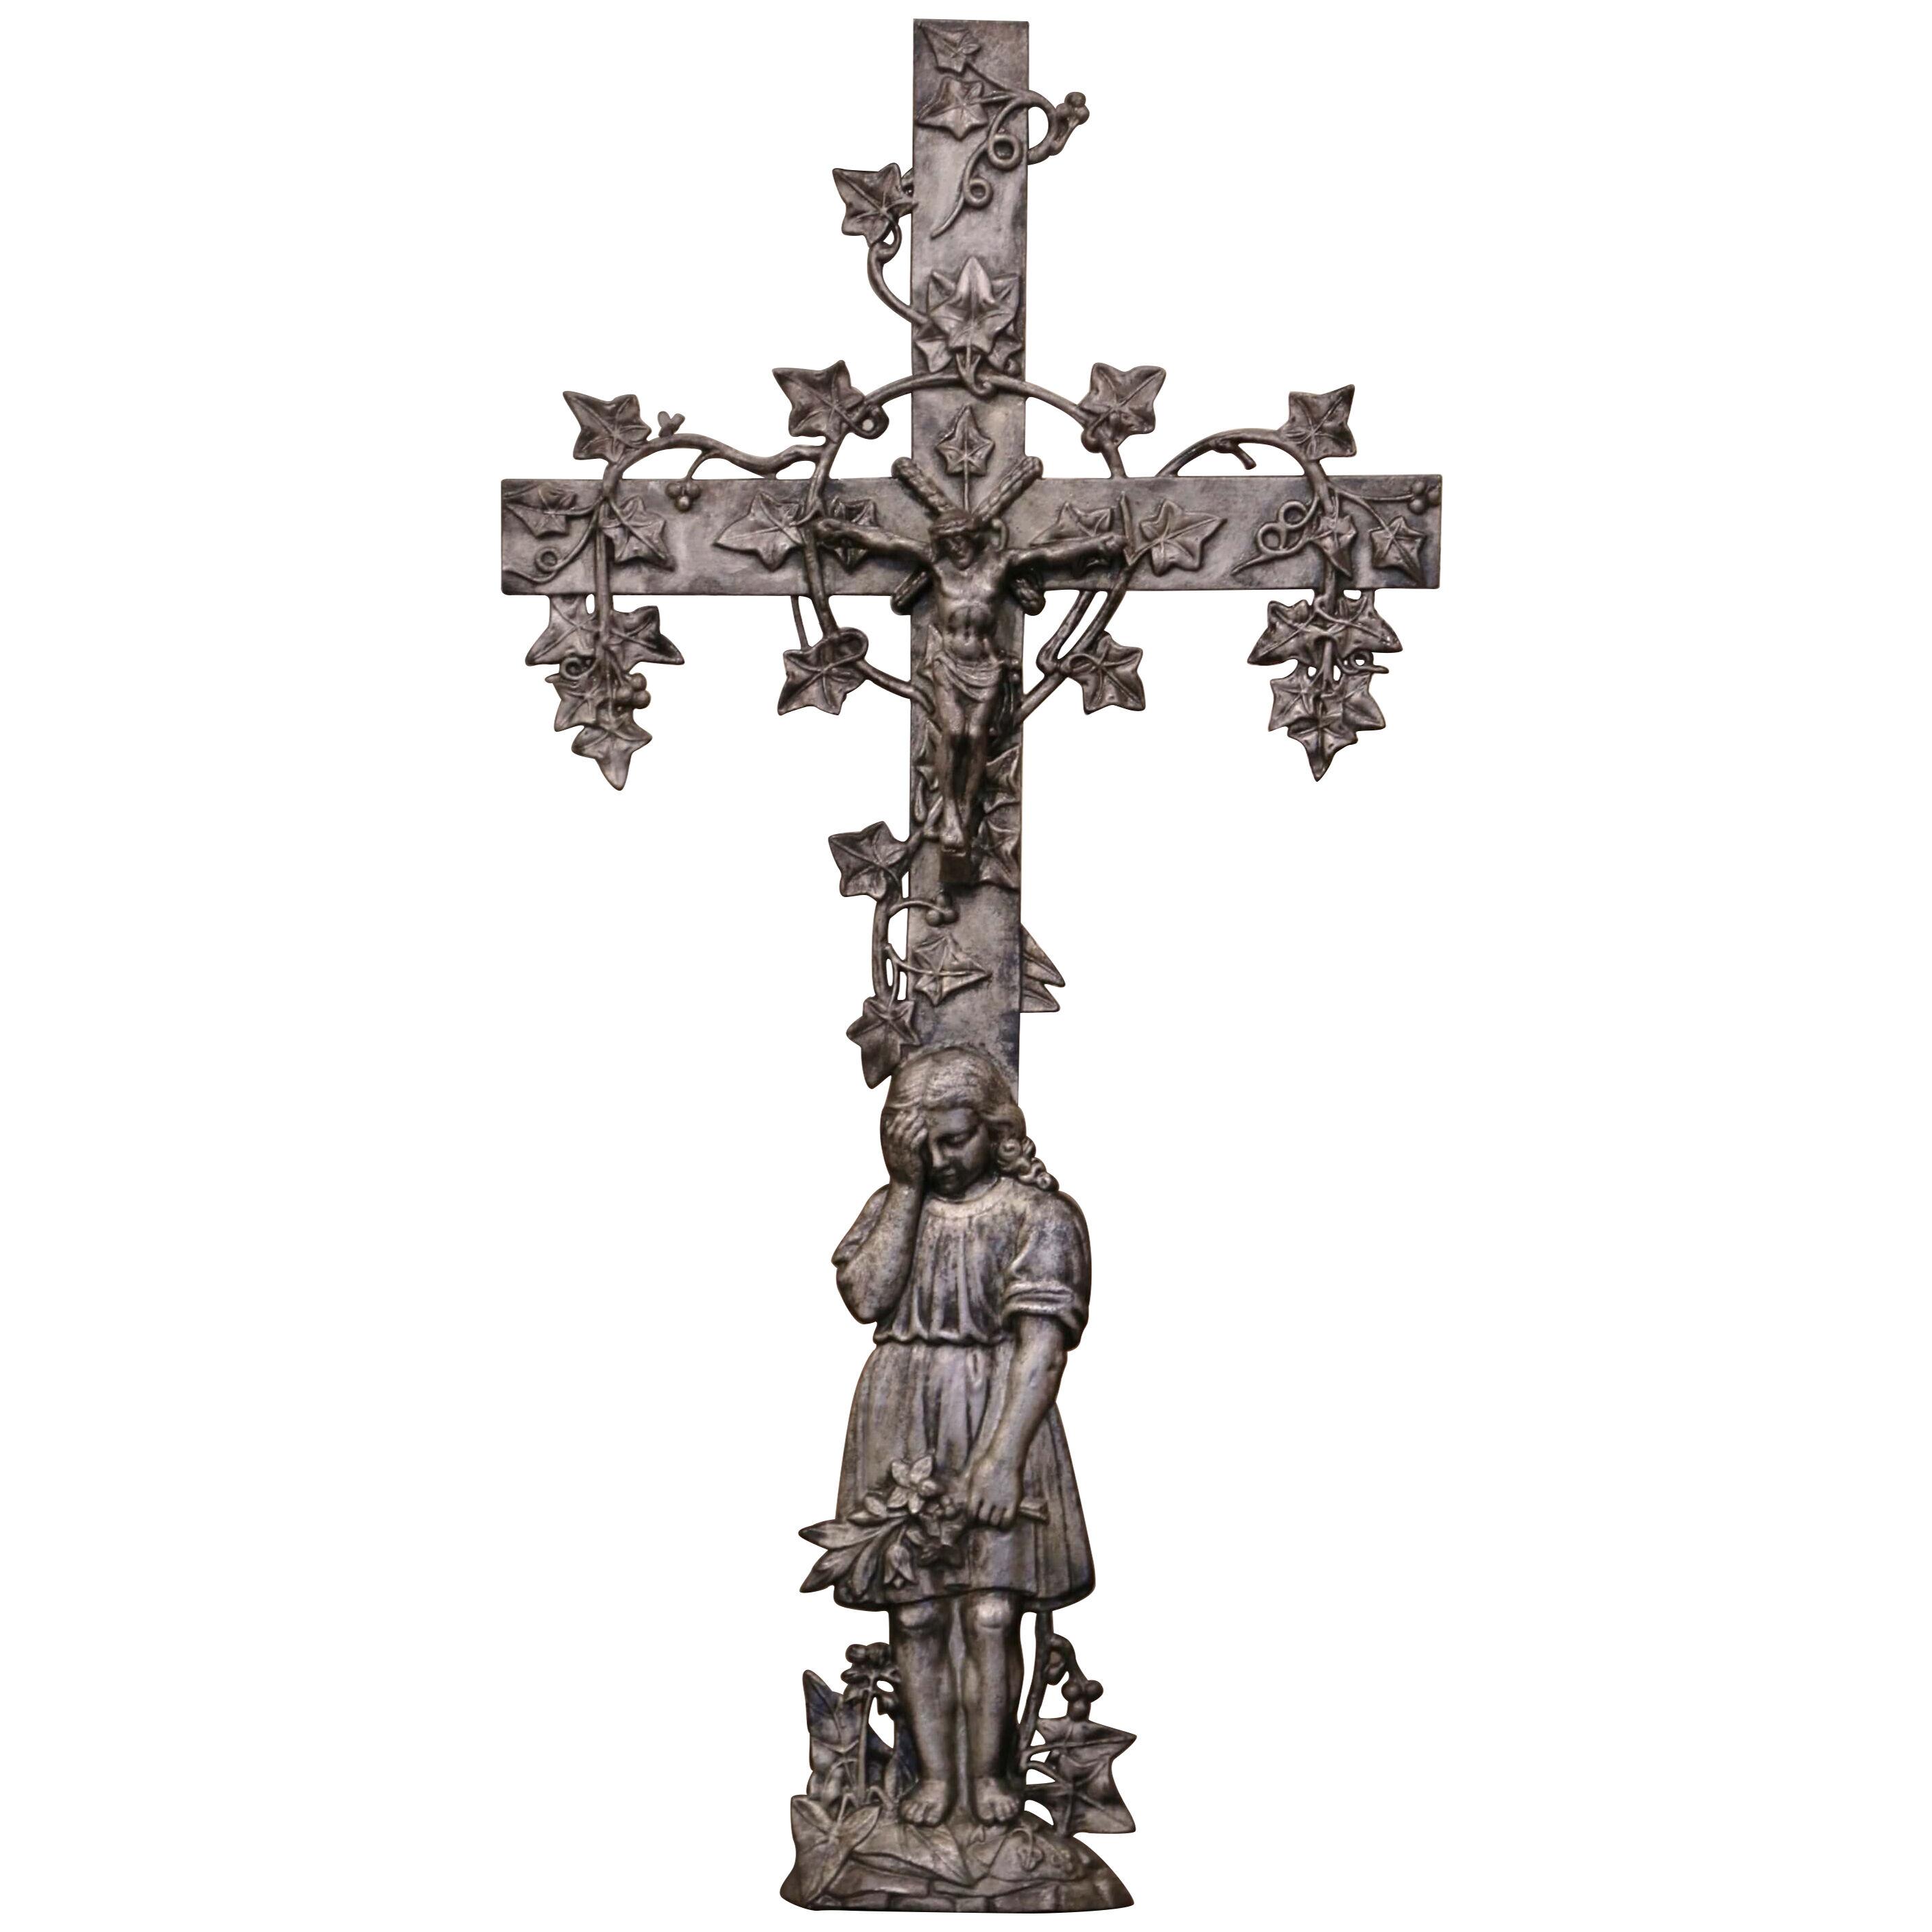 19th Century French Iron Garden Crucifix Cross with Mourner and Vine Motifs